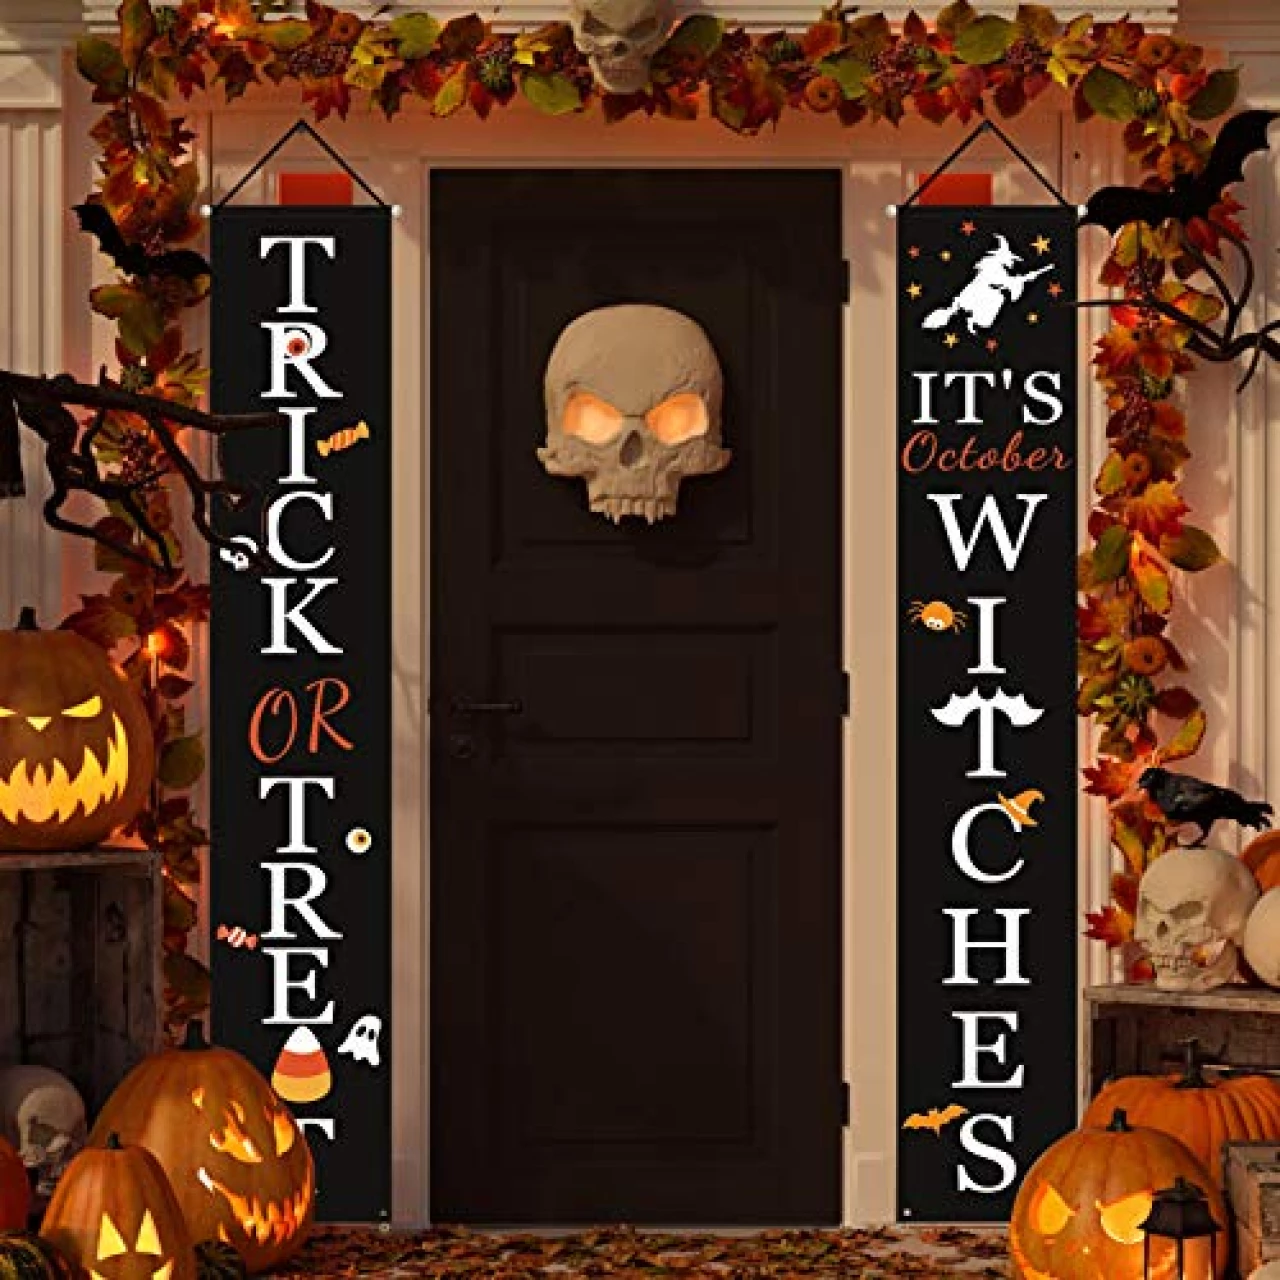 DAZONGE Halloween Decorations Outdoor | Trick or Treat &amp; It&rsquo;s October Witches Front Porch Banners for Halloween Porch Decor | Fall Decor | Halloween Decorations Indoor